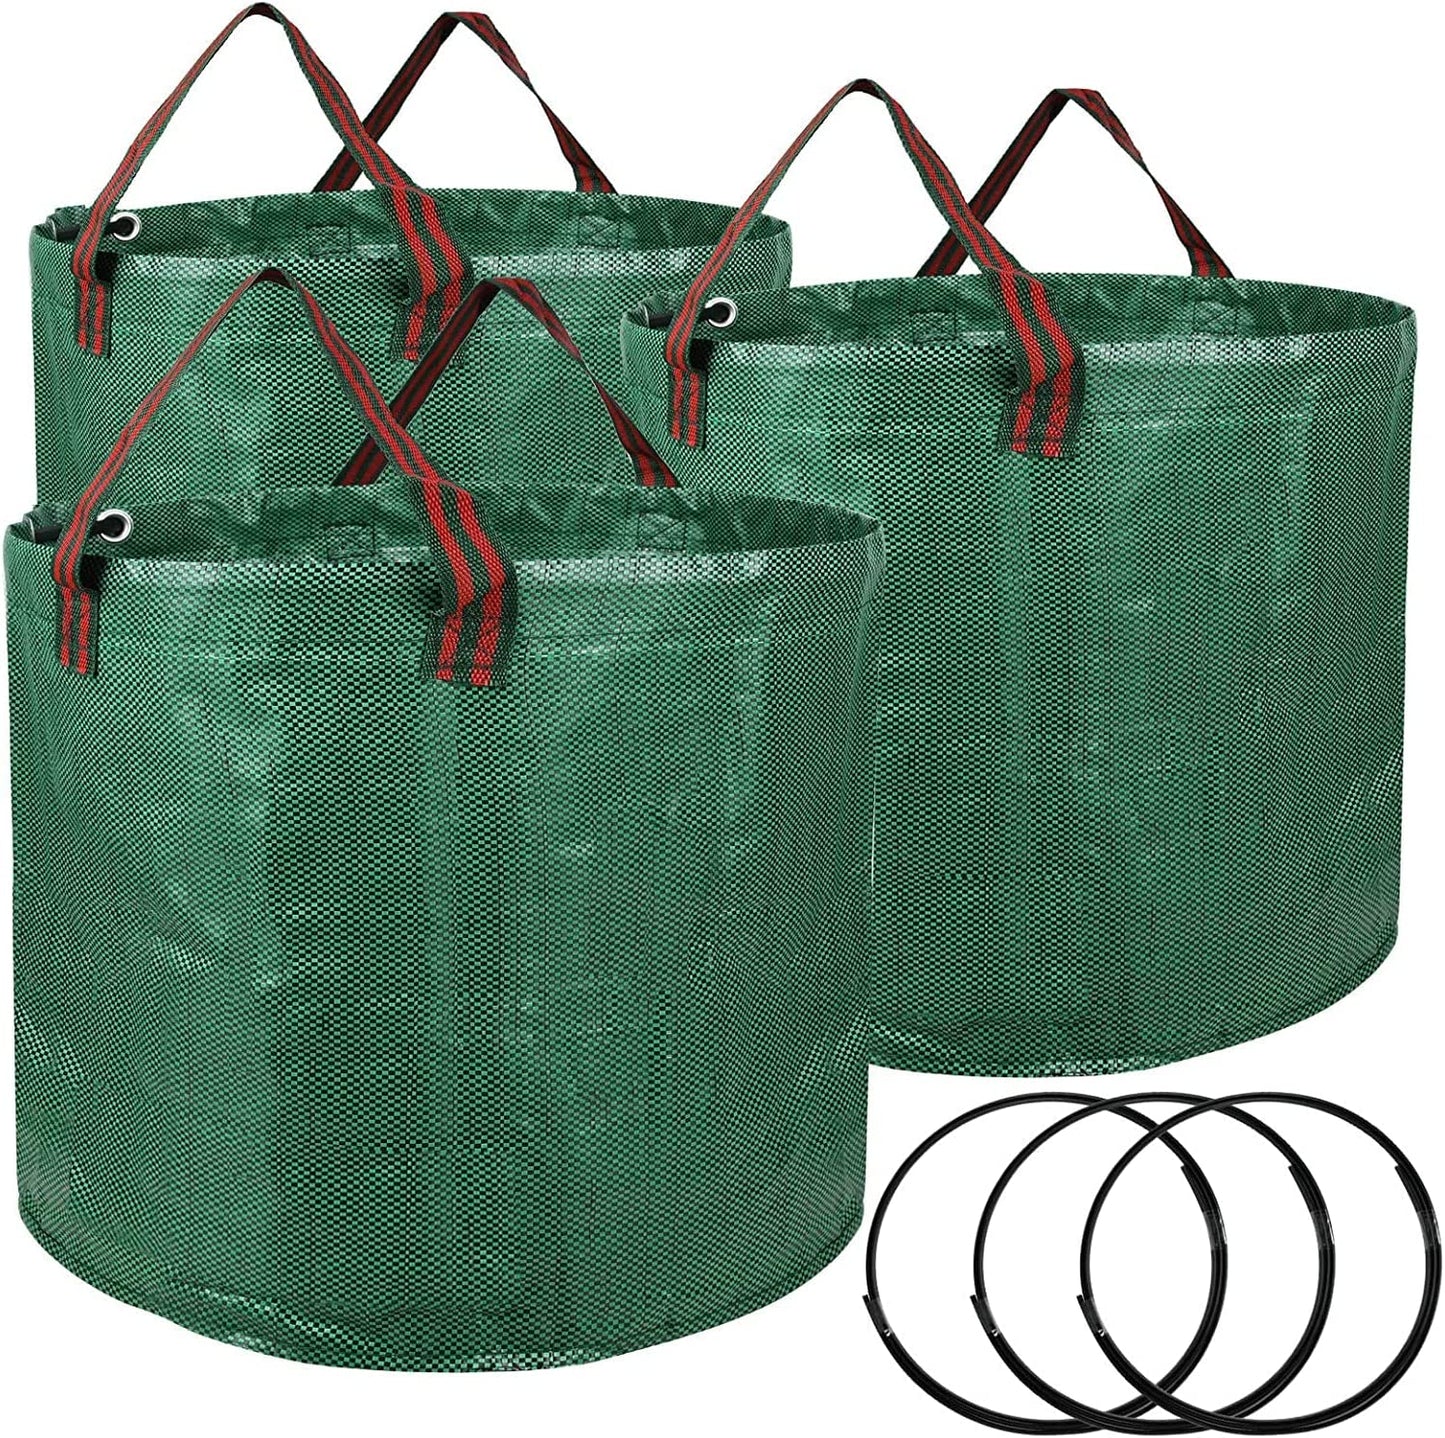 16-Gallon 3-Pack Lawn Garden Leaf Waste Bags, Heavy Duty Reusable Standable with Handles for Patio, Yard, Laundry Container and Trash Can, Sturdy Thickened PE Green Color